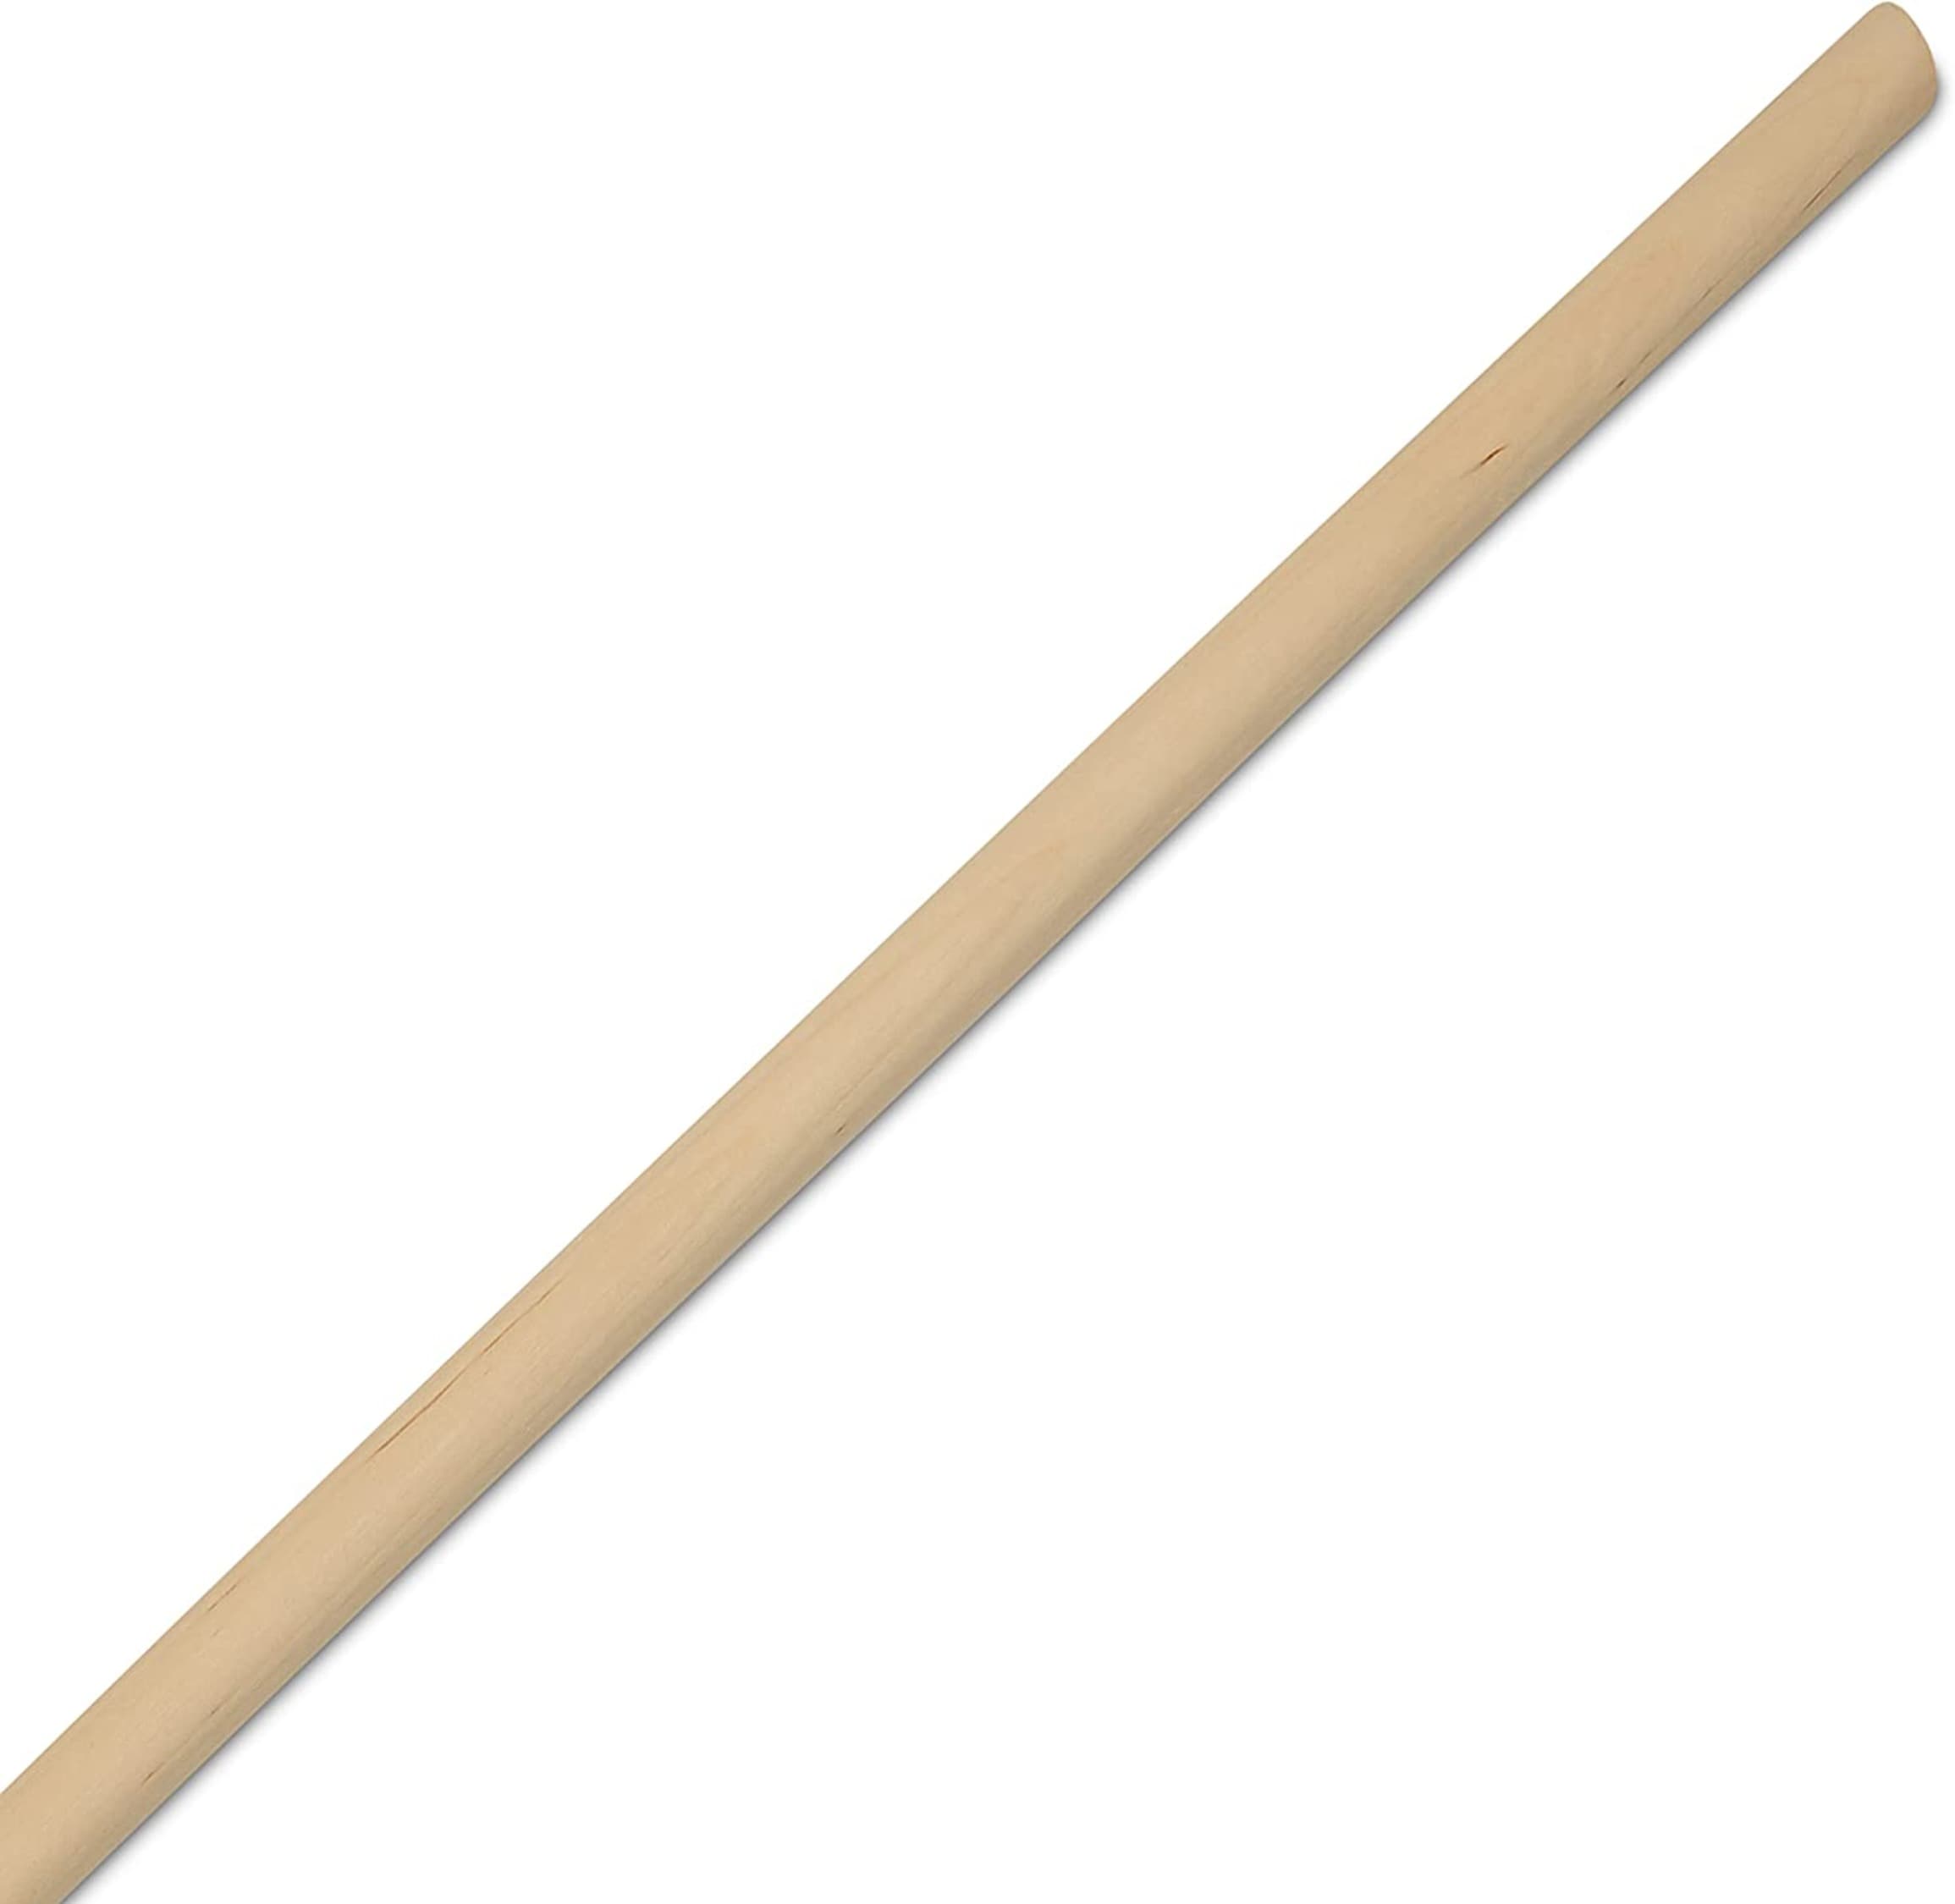 Dowel Rods Wood Sticks Wooden Dowel Rods - 5/8 x 60 inch Unfinished  Hardwood Sticks - for Crafts and DIYers - 25 Pieces by Woodpeckers 